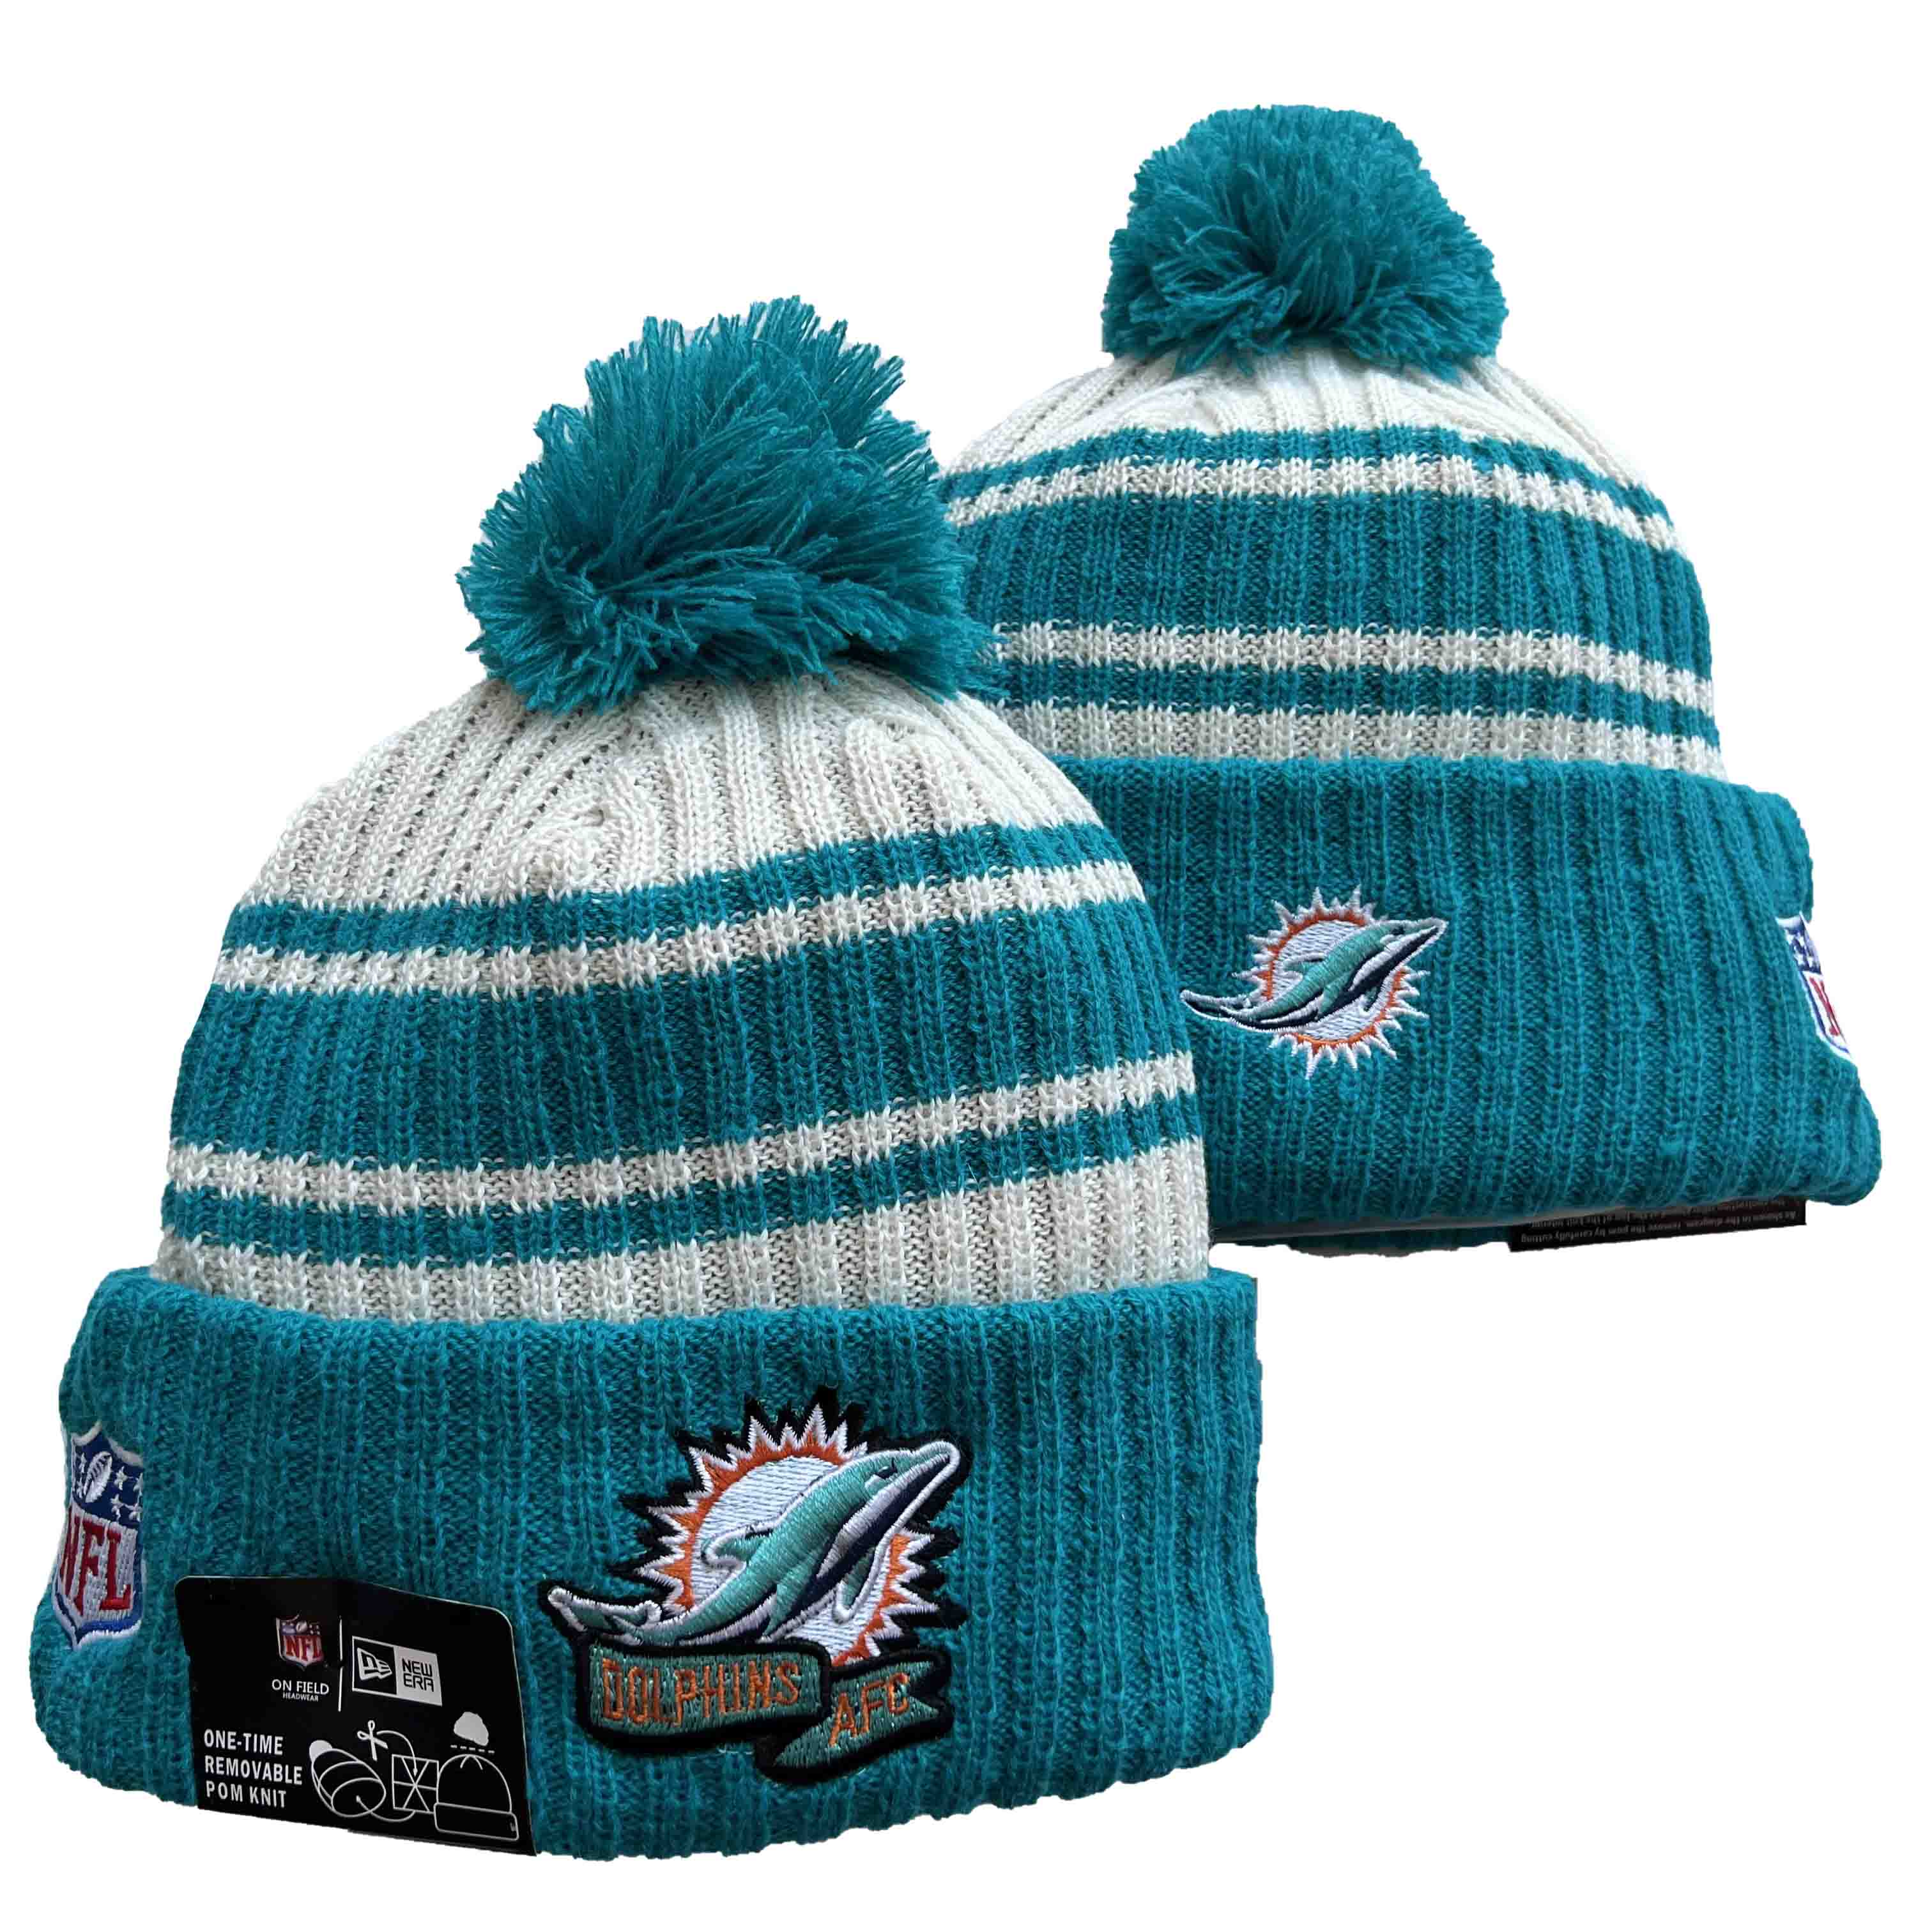 NFL Miami Dolphins Beanies Knit Hats-YD1033